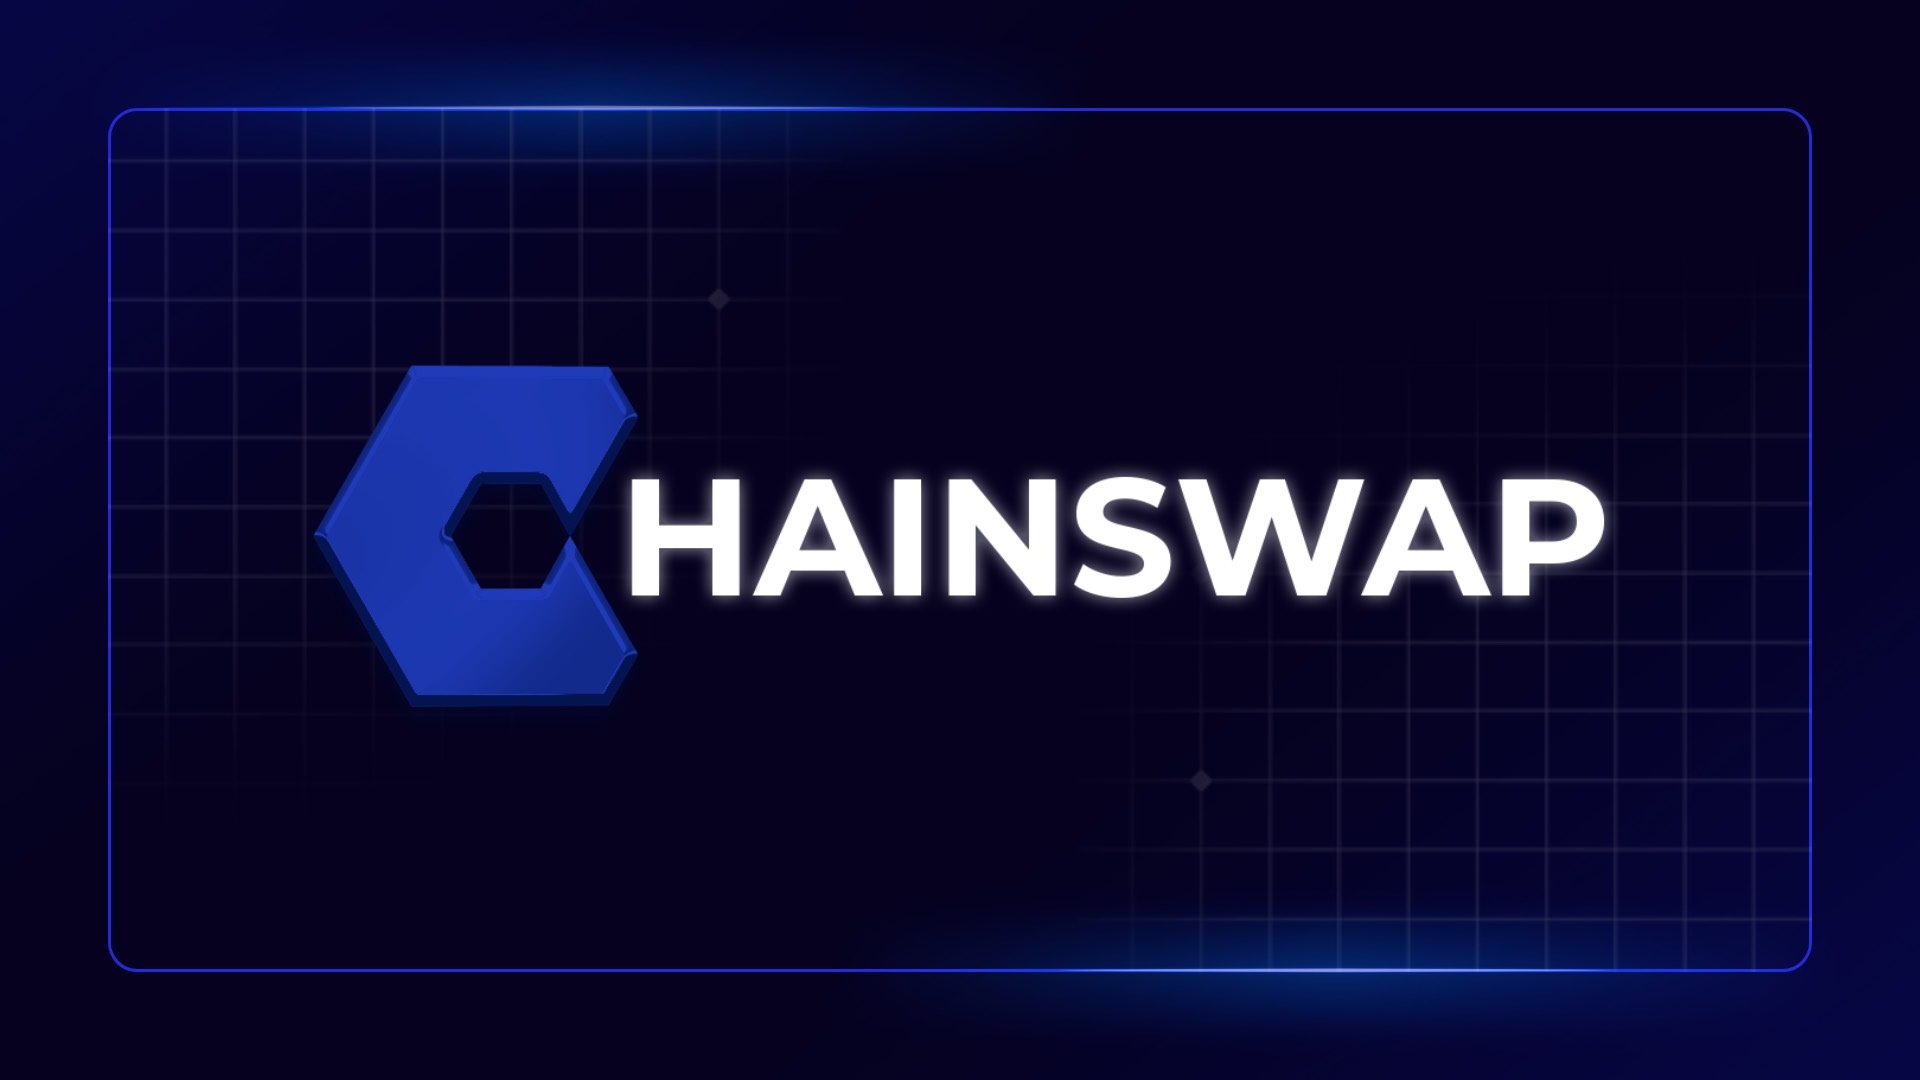 ChainSwap: Unify Your Crypto Experience